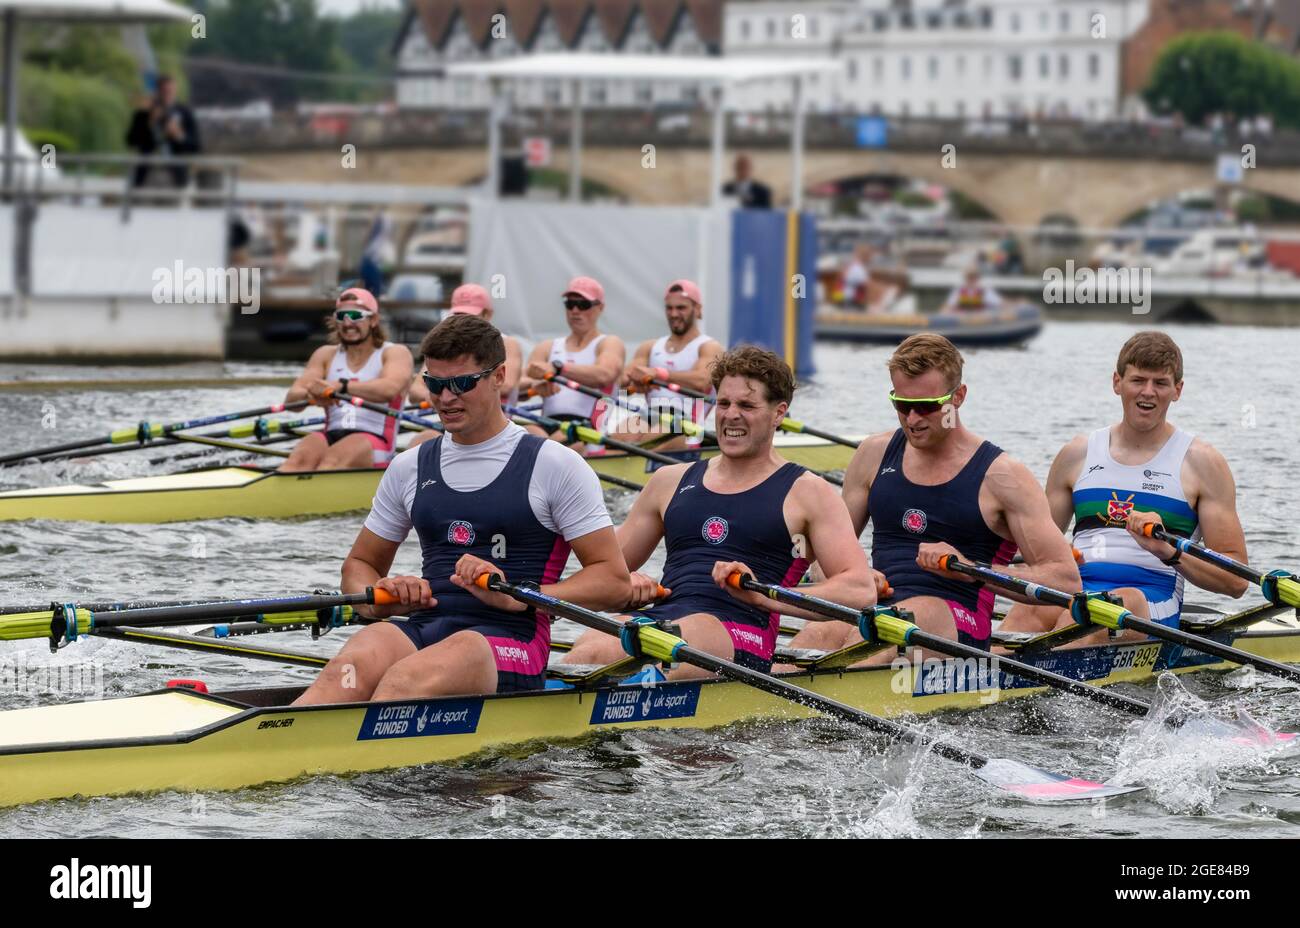 Final of the Prince of Wales Challenge Cup when Leander Club beat Twickenham Rowing Club & Queen's University, Belfast by 1.5 lengths at Henley Stock Photo